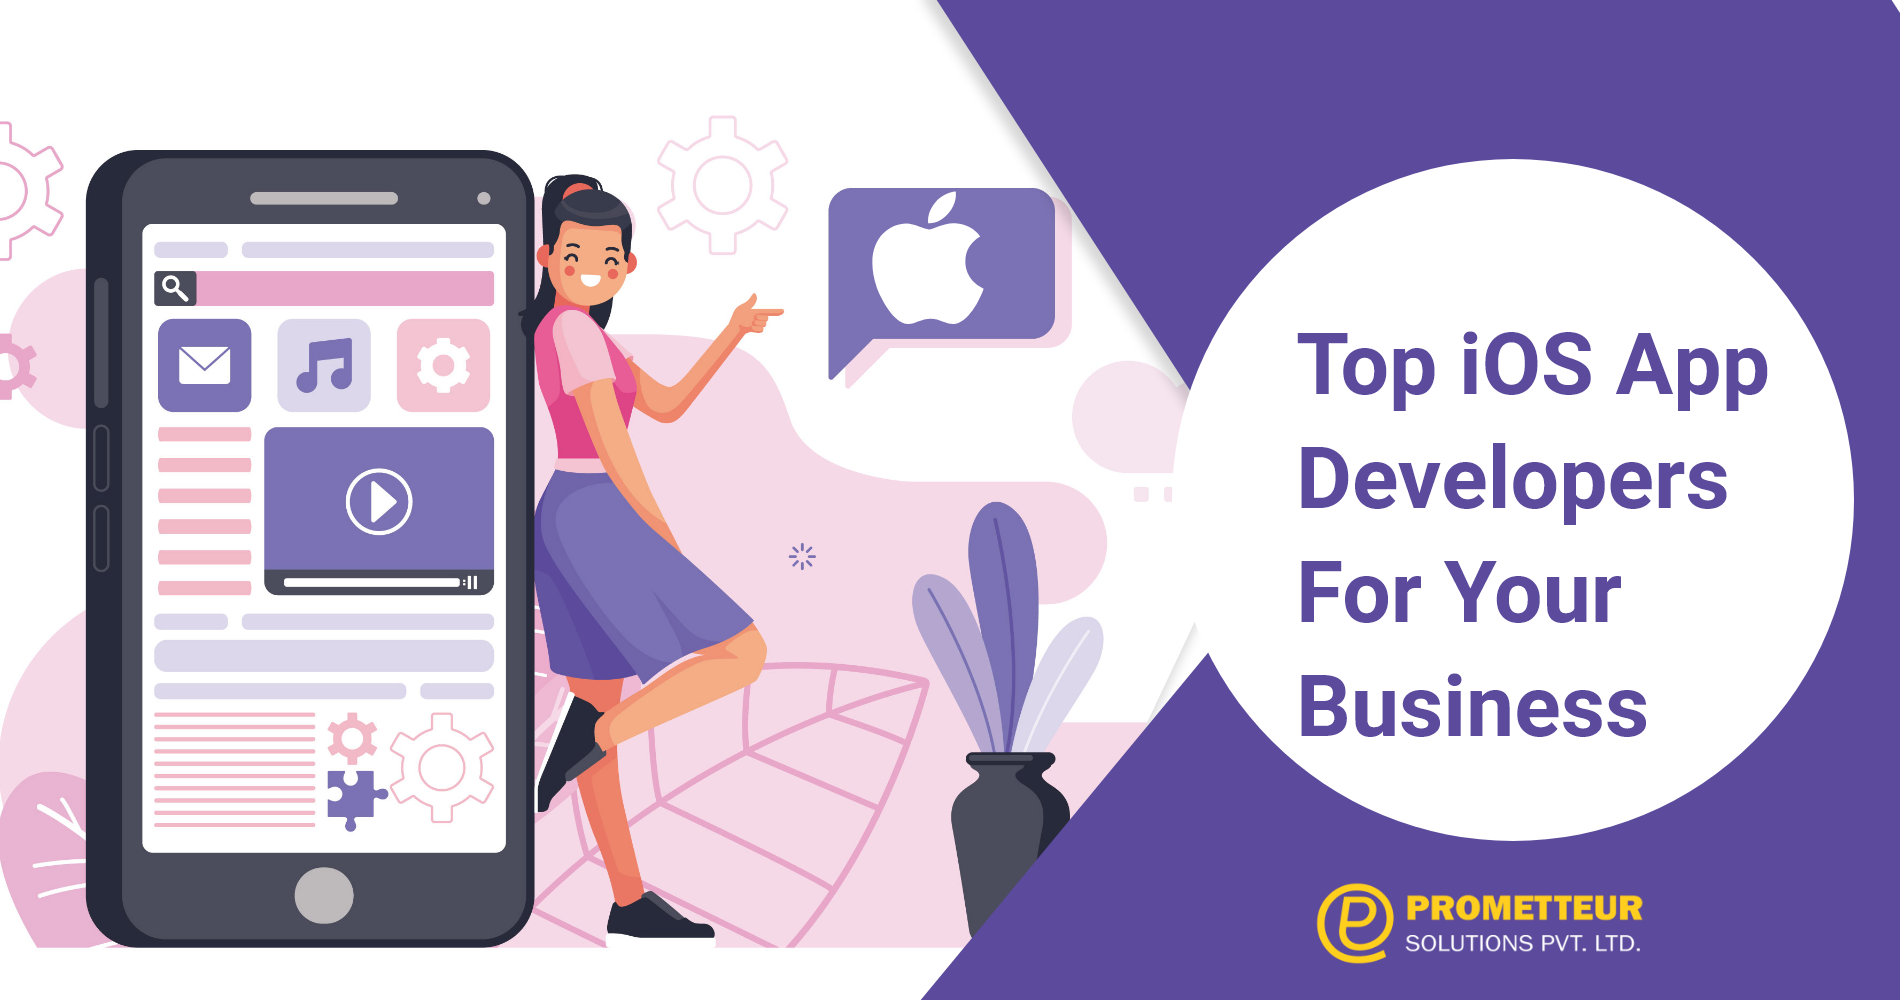 Top iOS App Developers For Your Business